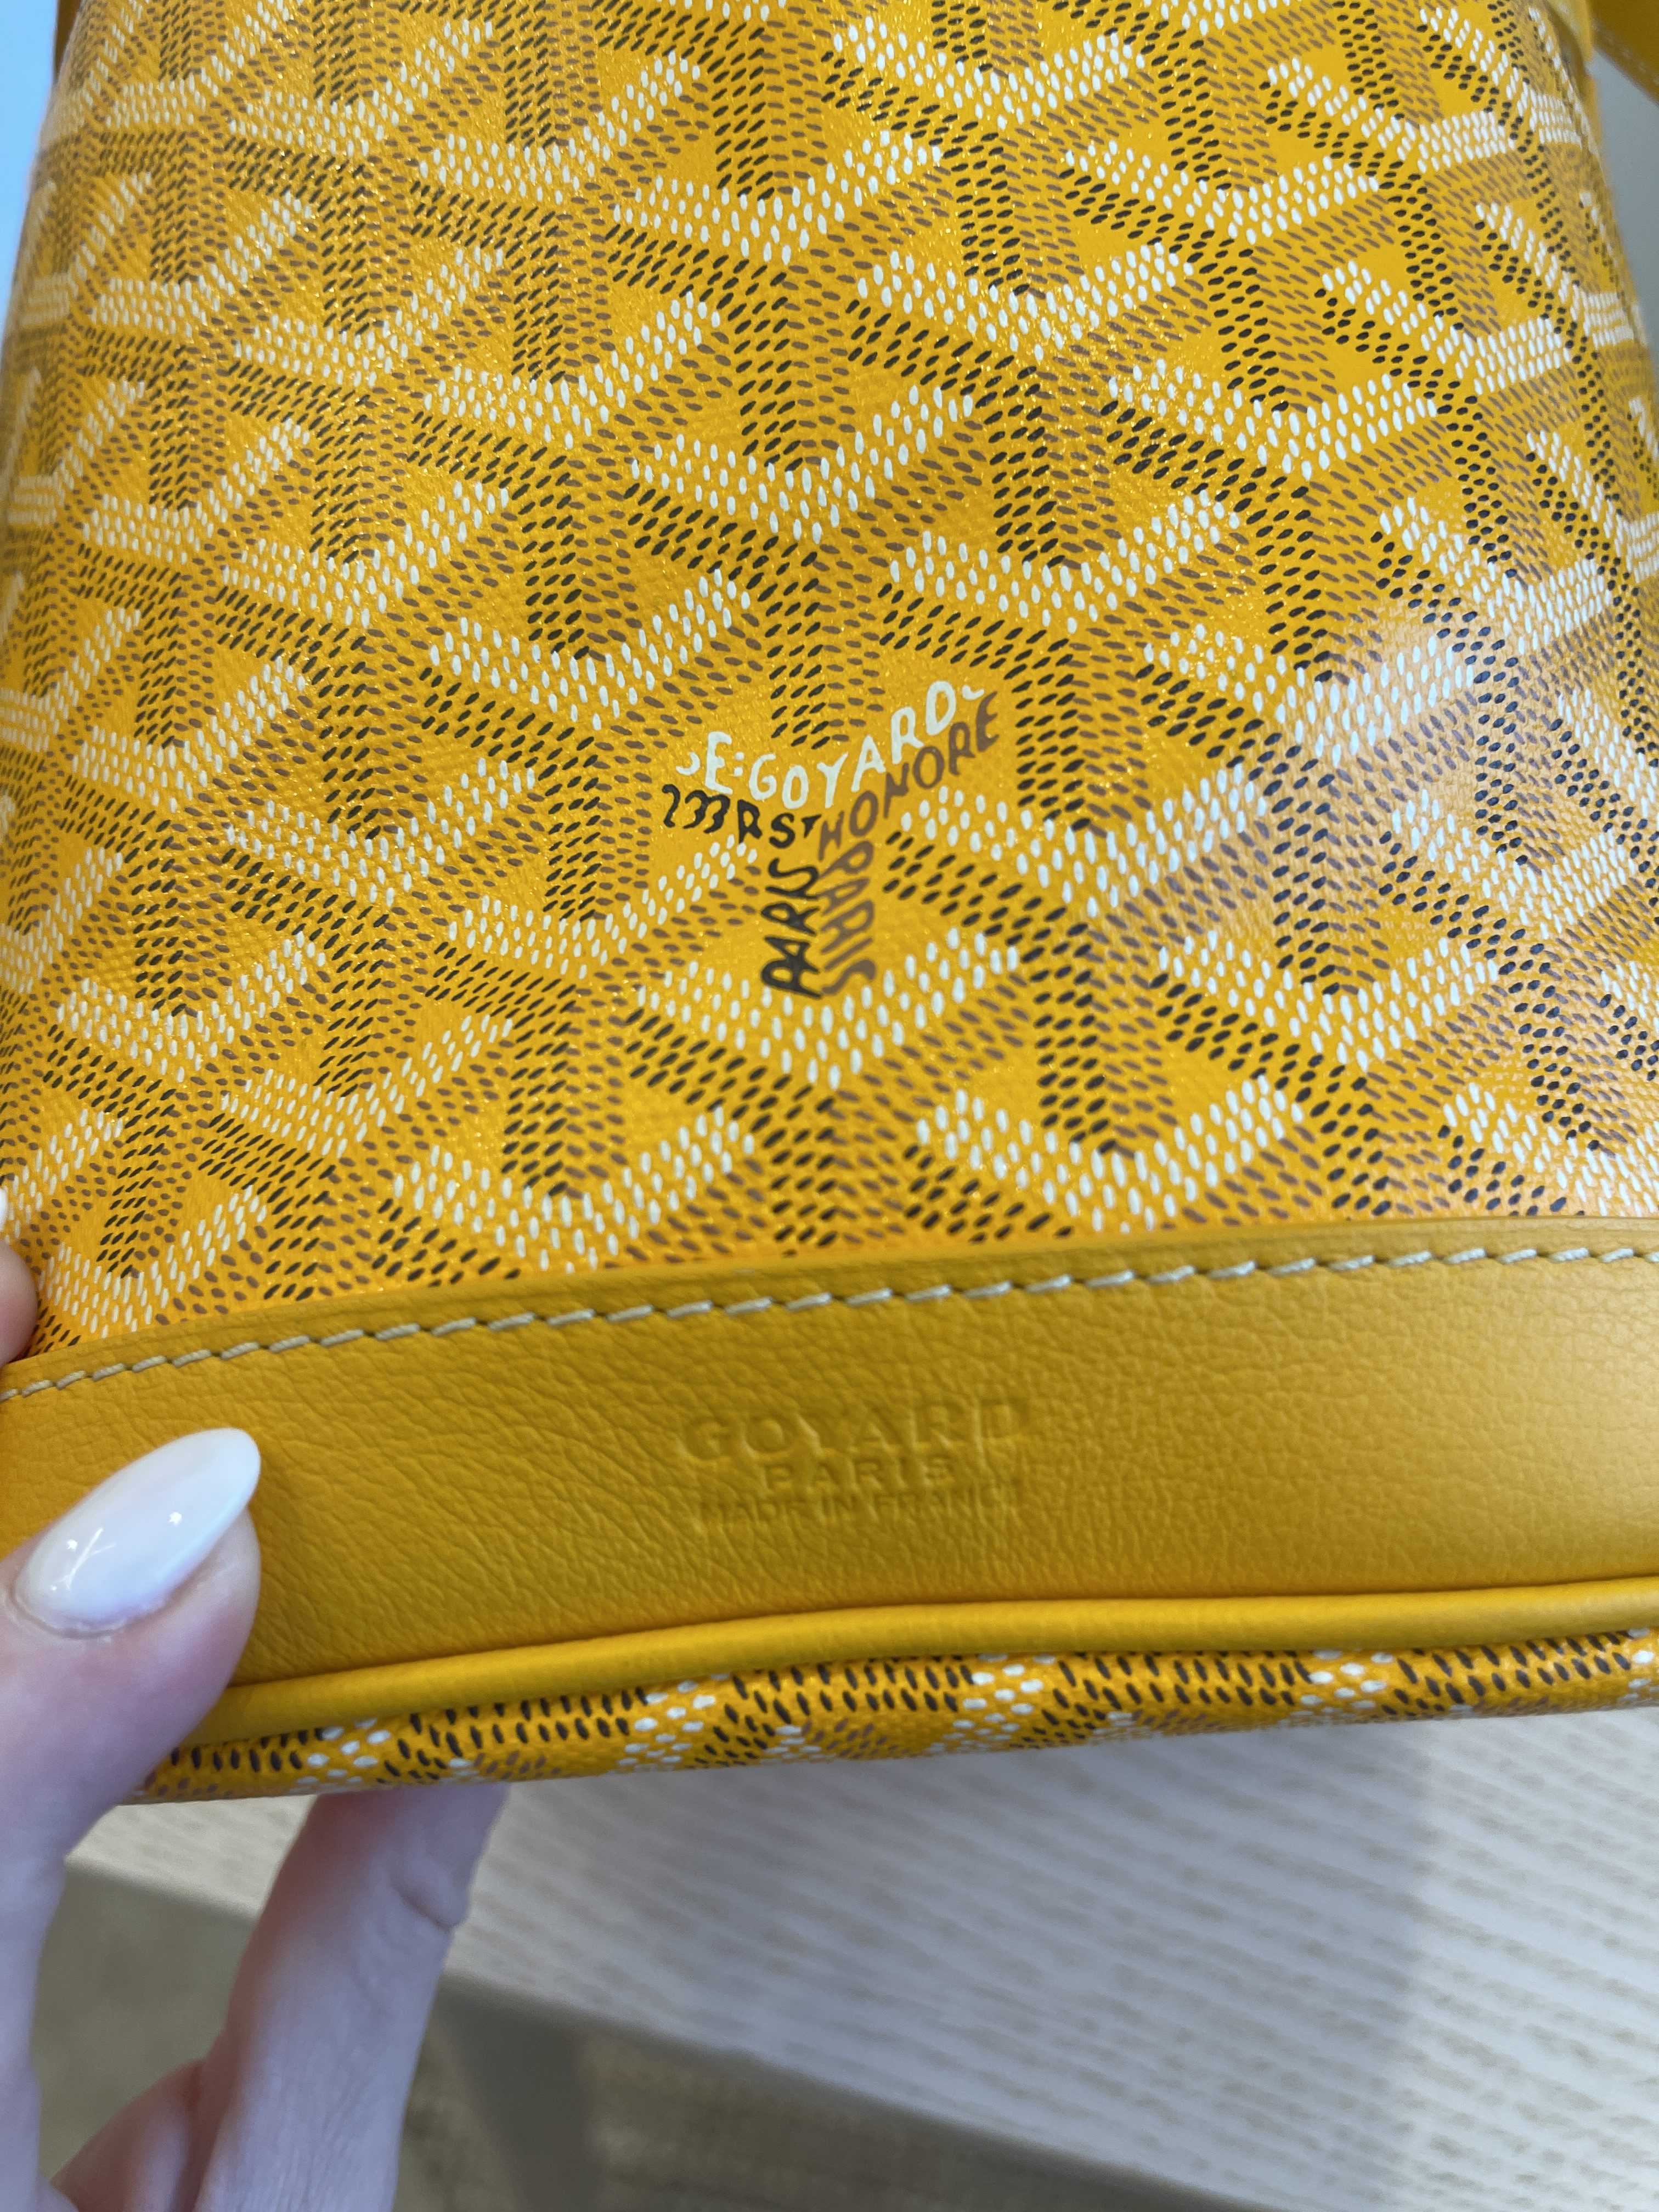 GOYARD Small Bucket Bags 😍from Jeniffer Marie 🎀 WHATSAPP +86 181 5907  0918 ☆ PAYPAL ACCEPTED WITH BUYER PROTECTION ☆ : r/AuthenticQualityBags